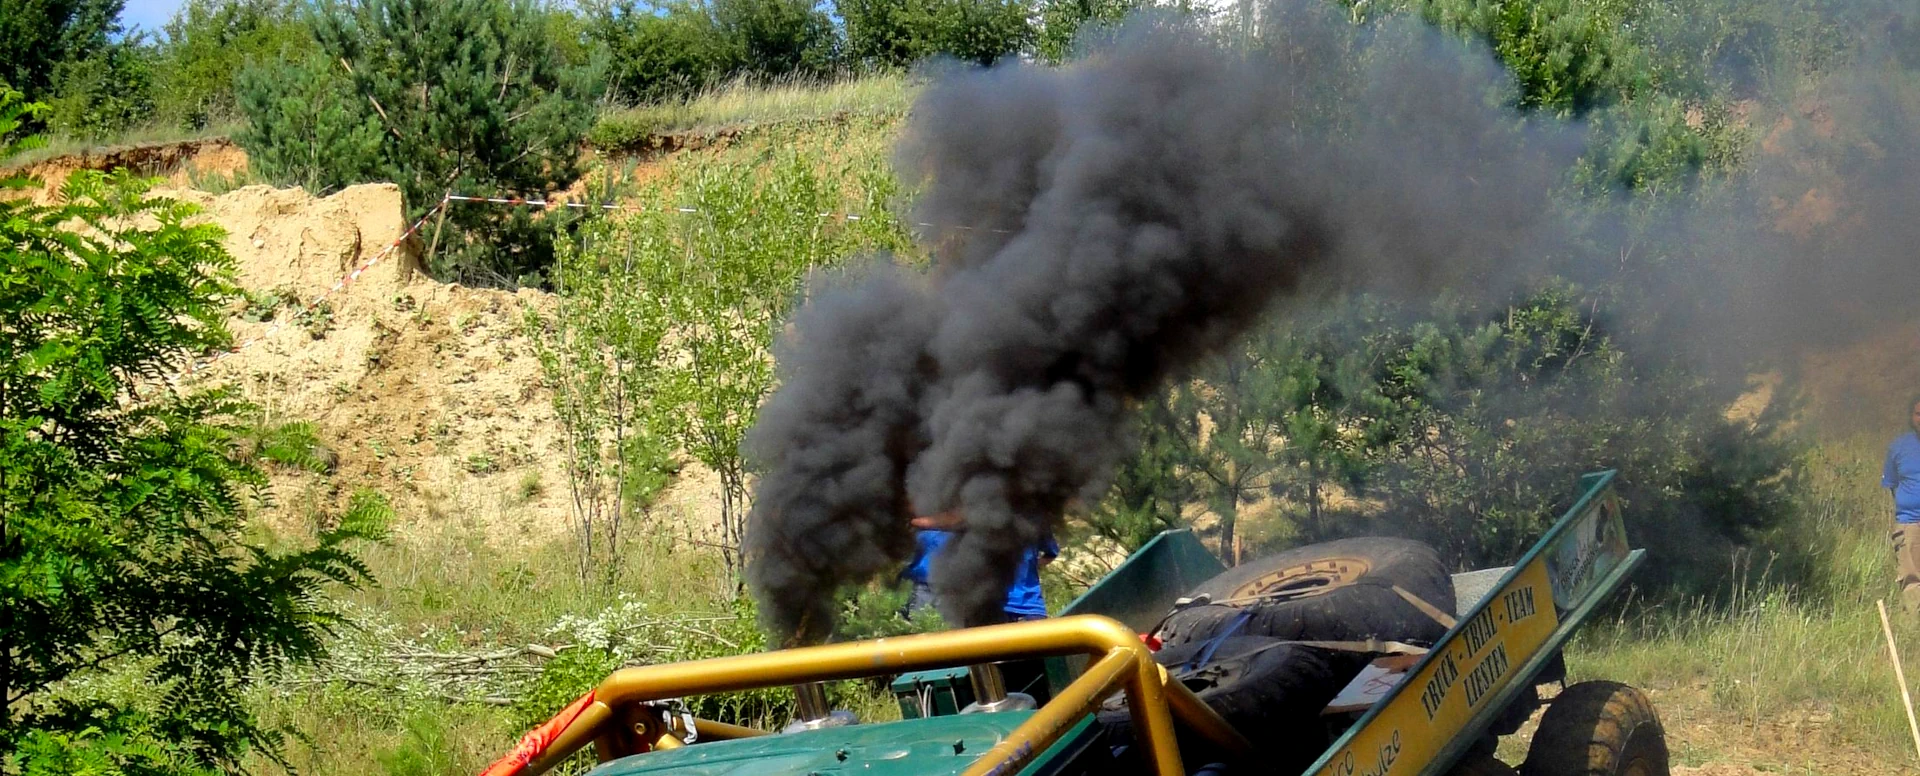 Motorsports pollution. A truck spews out a thick, black plume of sooty diesel exhaust at a truck trials event. Rolling coal!